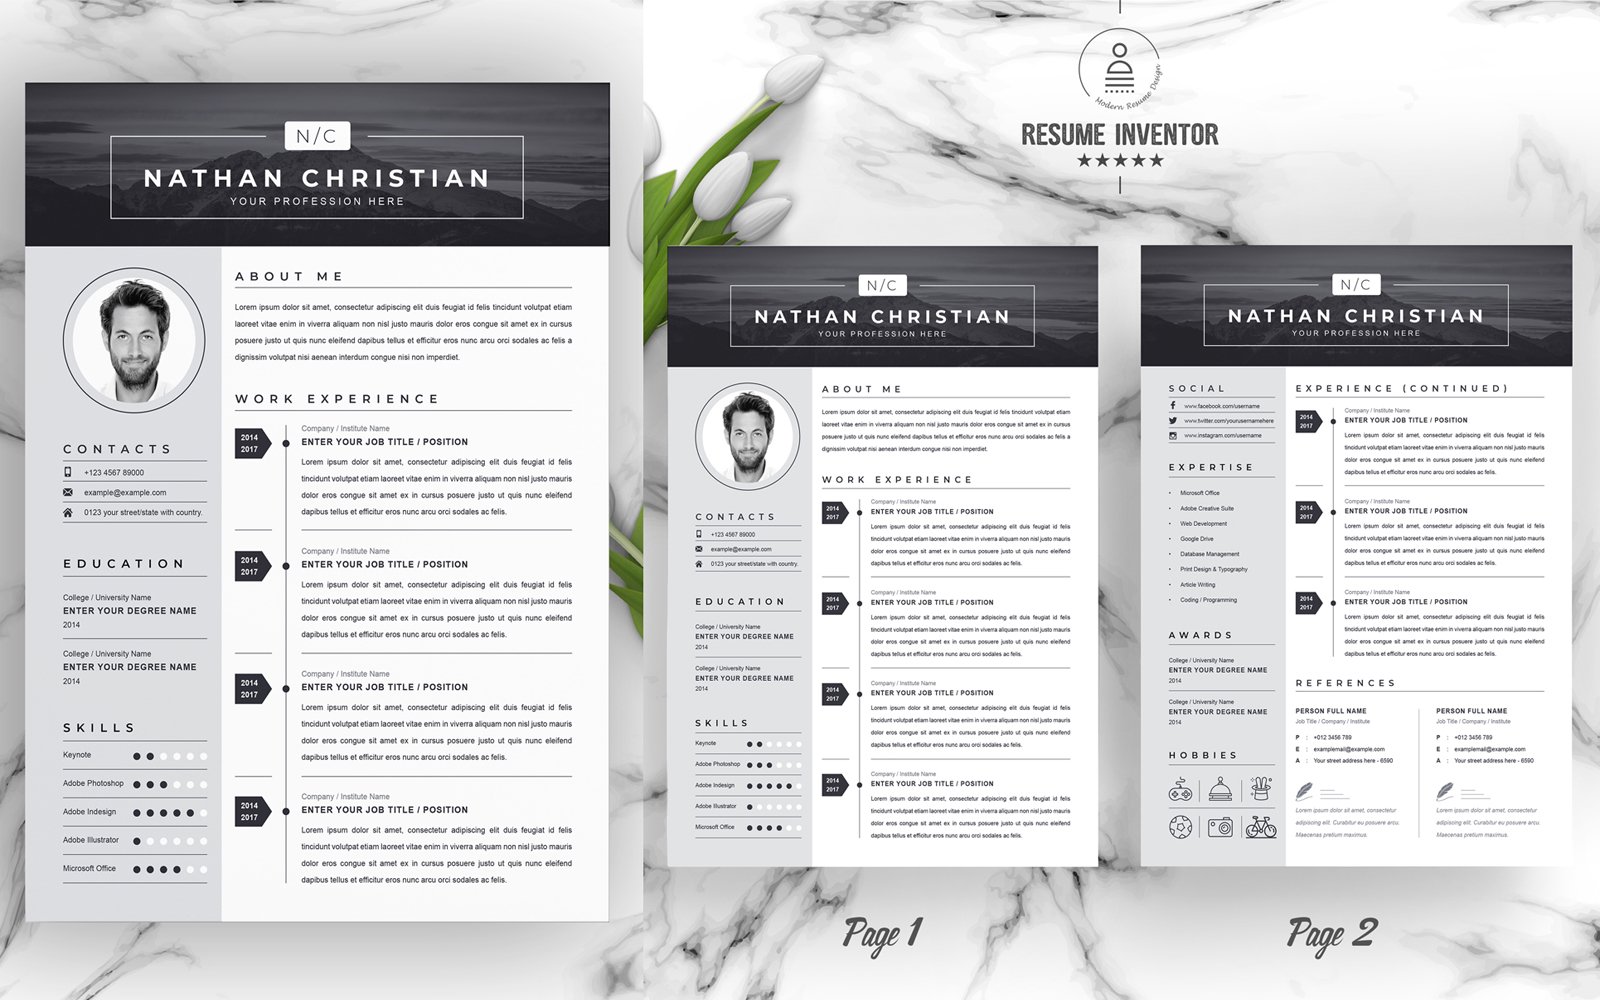 Template #187203 Resume Template Webdesign Template - Logo template Preview